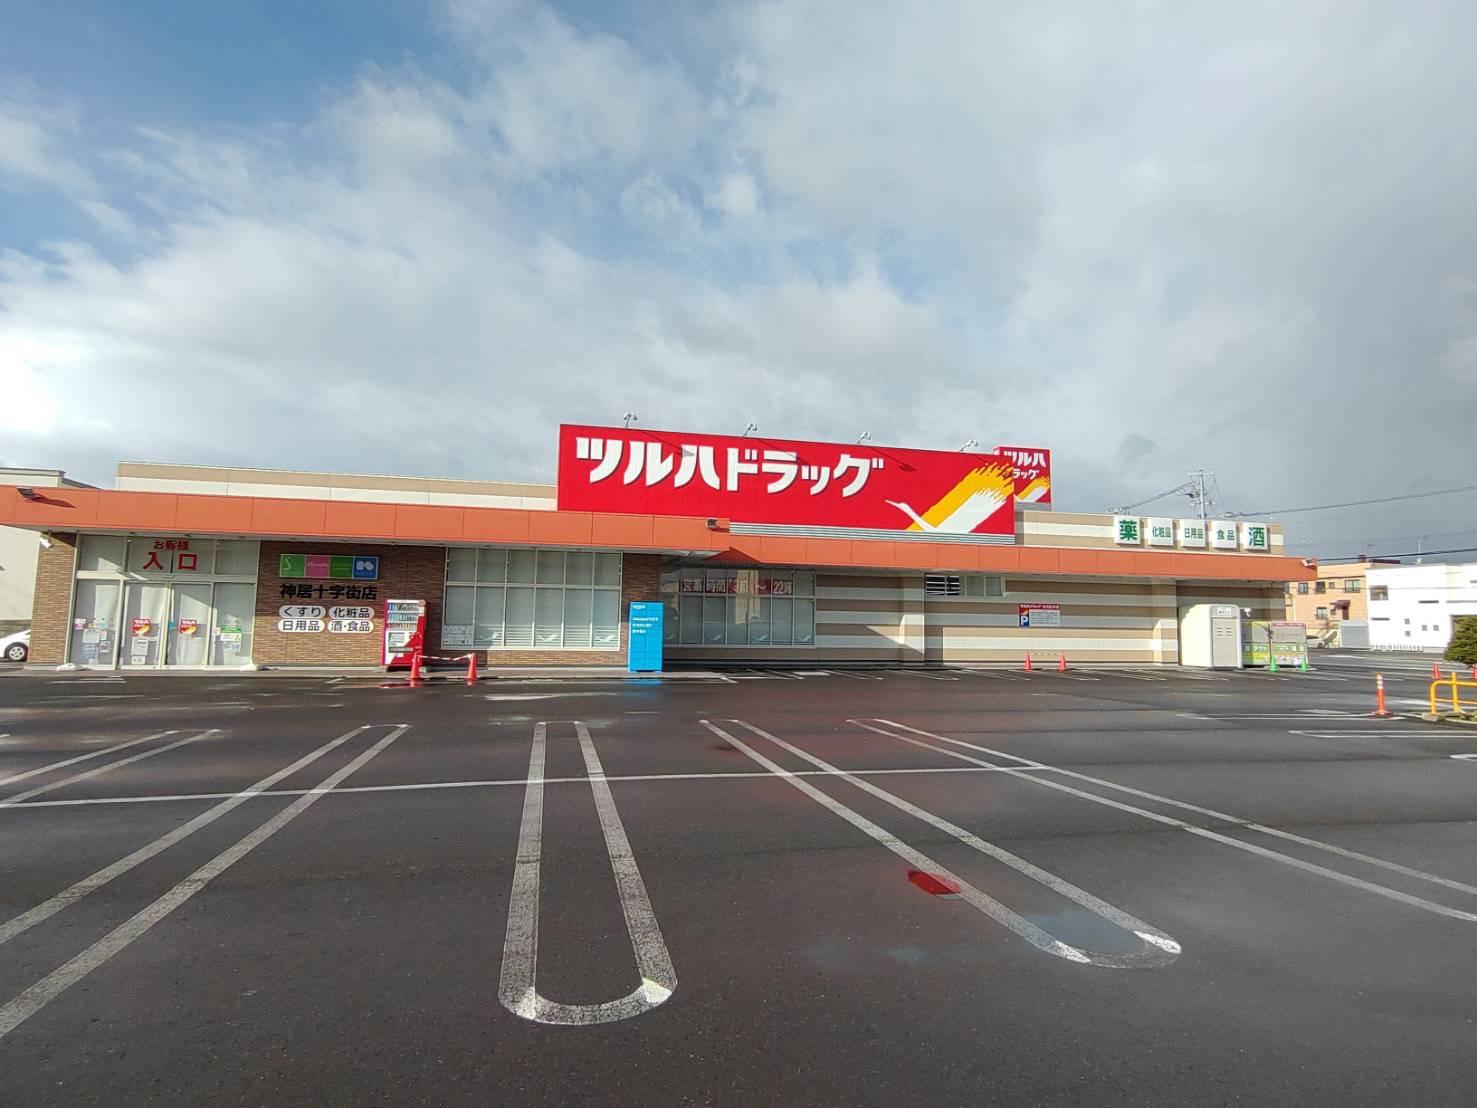 Images ツルハドラッグ 神居十字街店